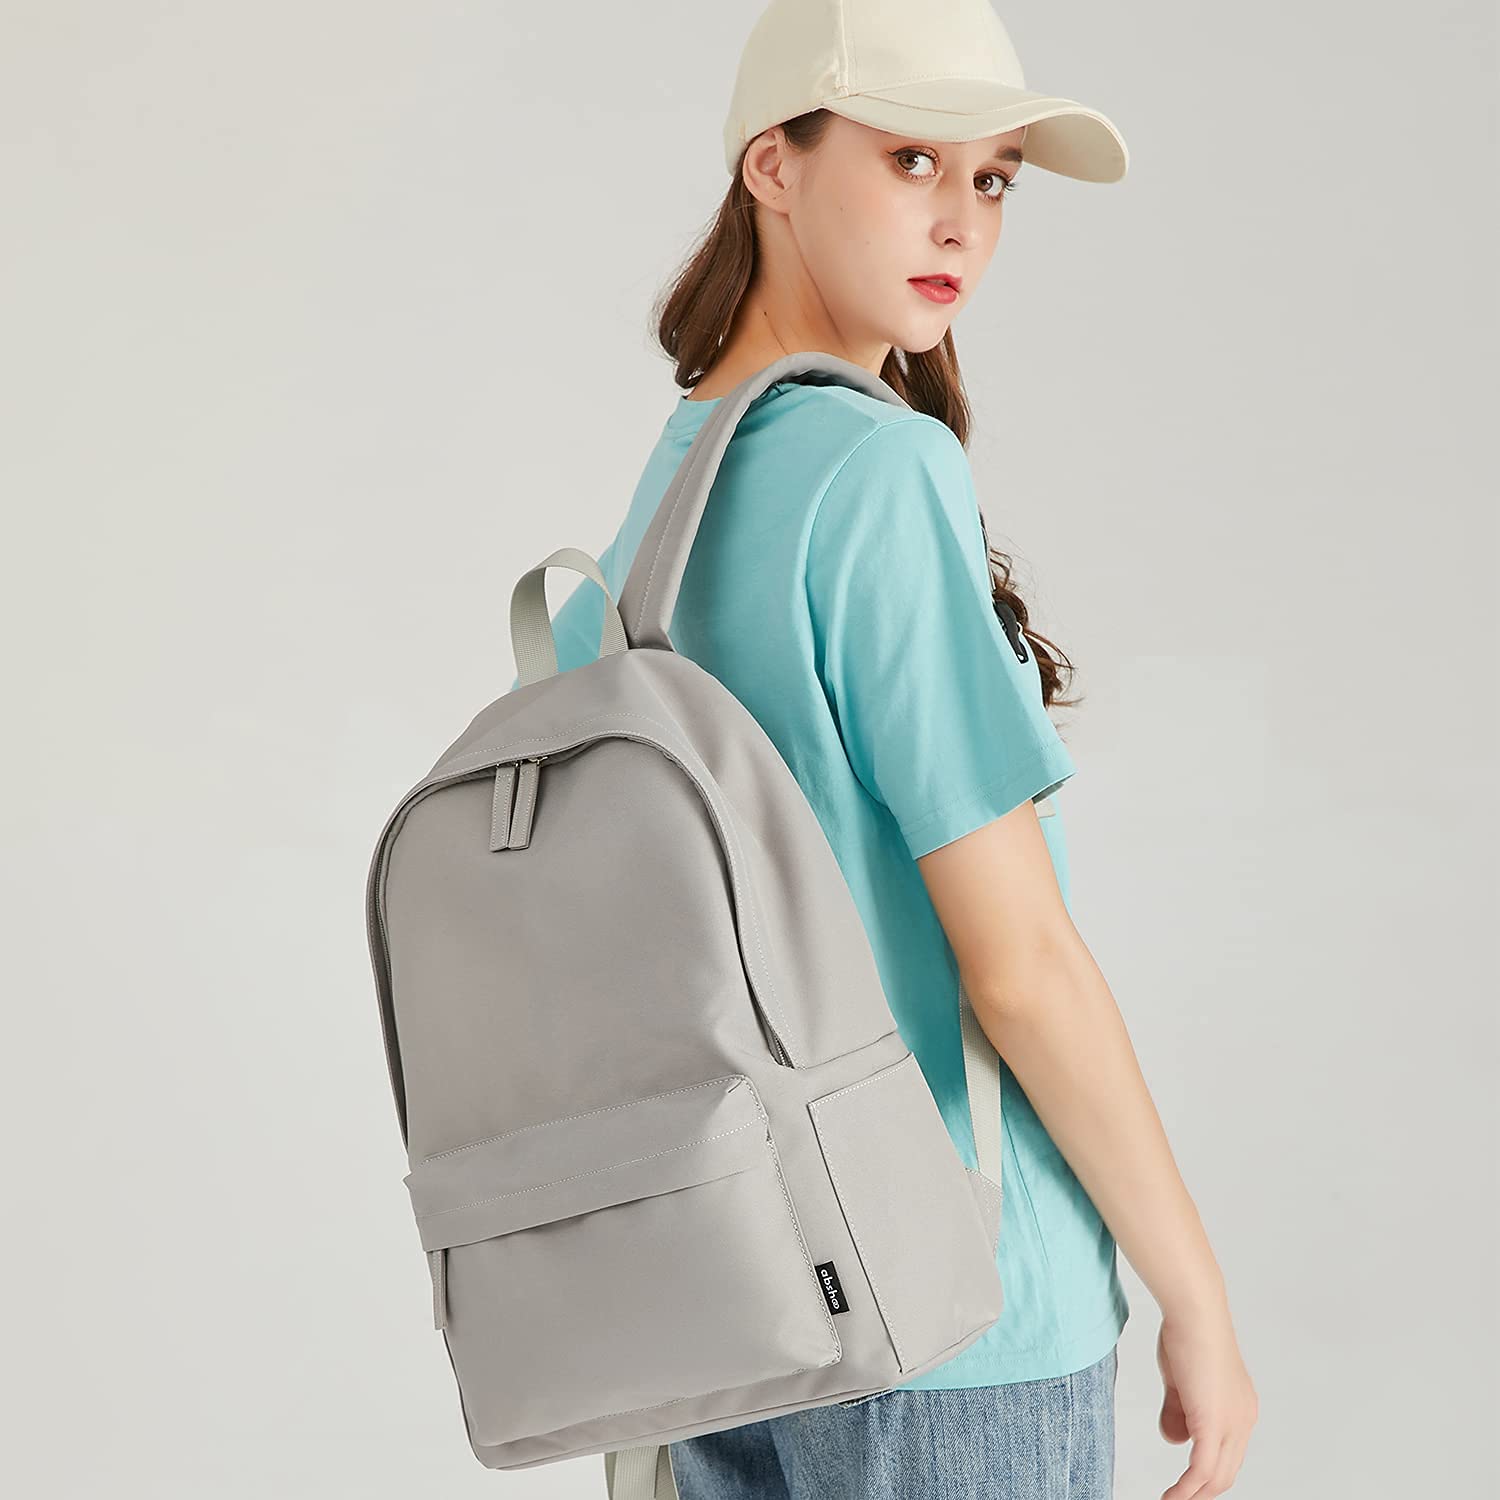 abshoo Lightweight Casual Unisex Backpack for School Solid Color Boobags (Light Grey)